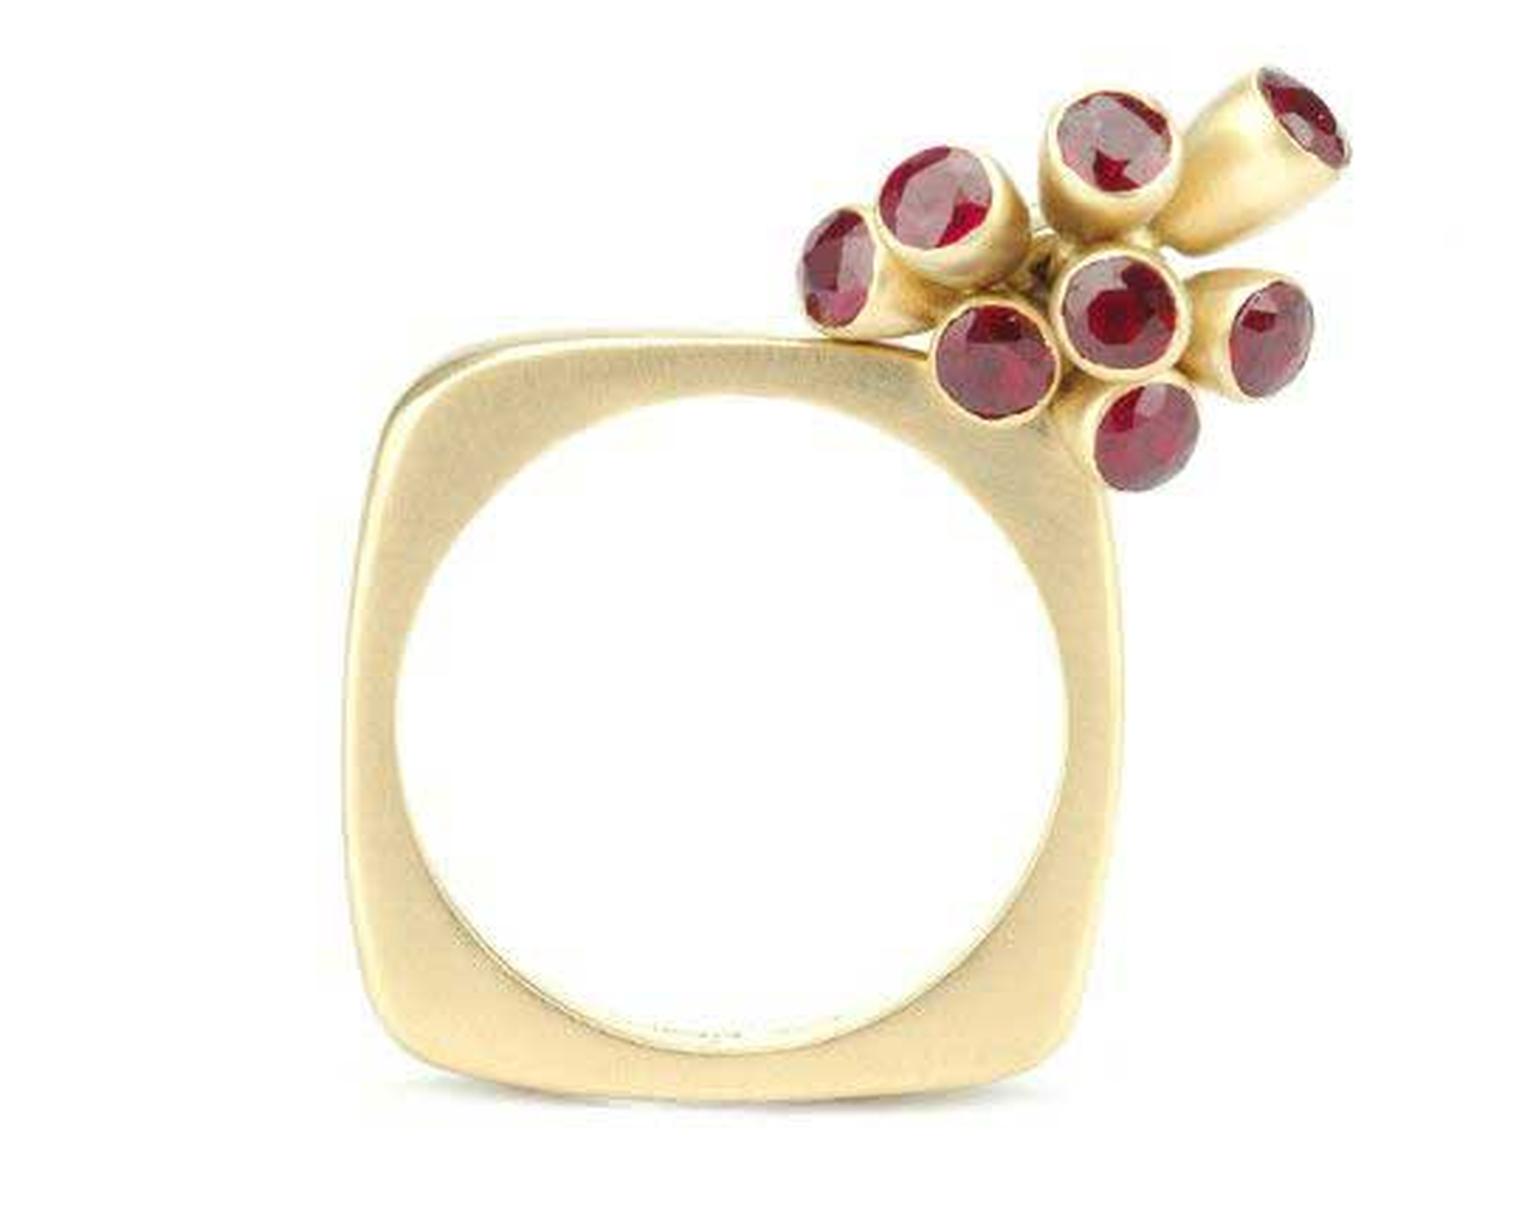 Mirri Damer gold square ring featuring seven moving ruby buds.